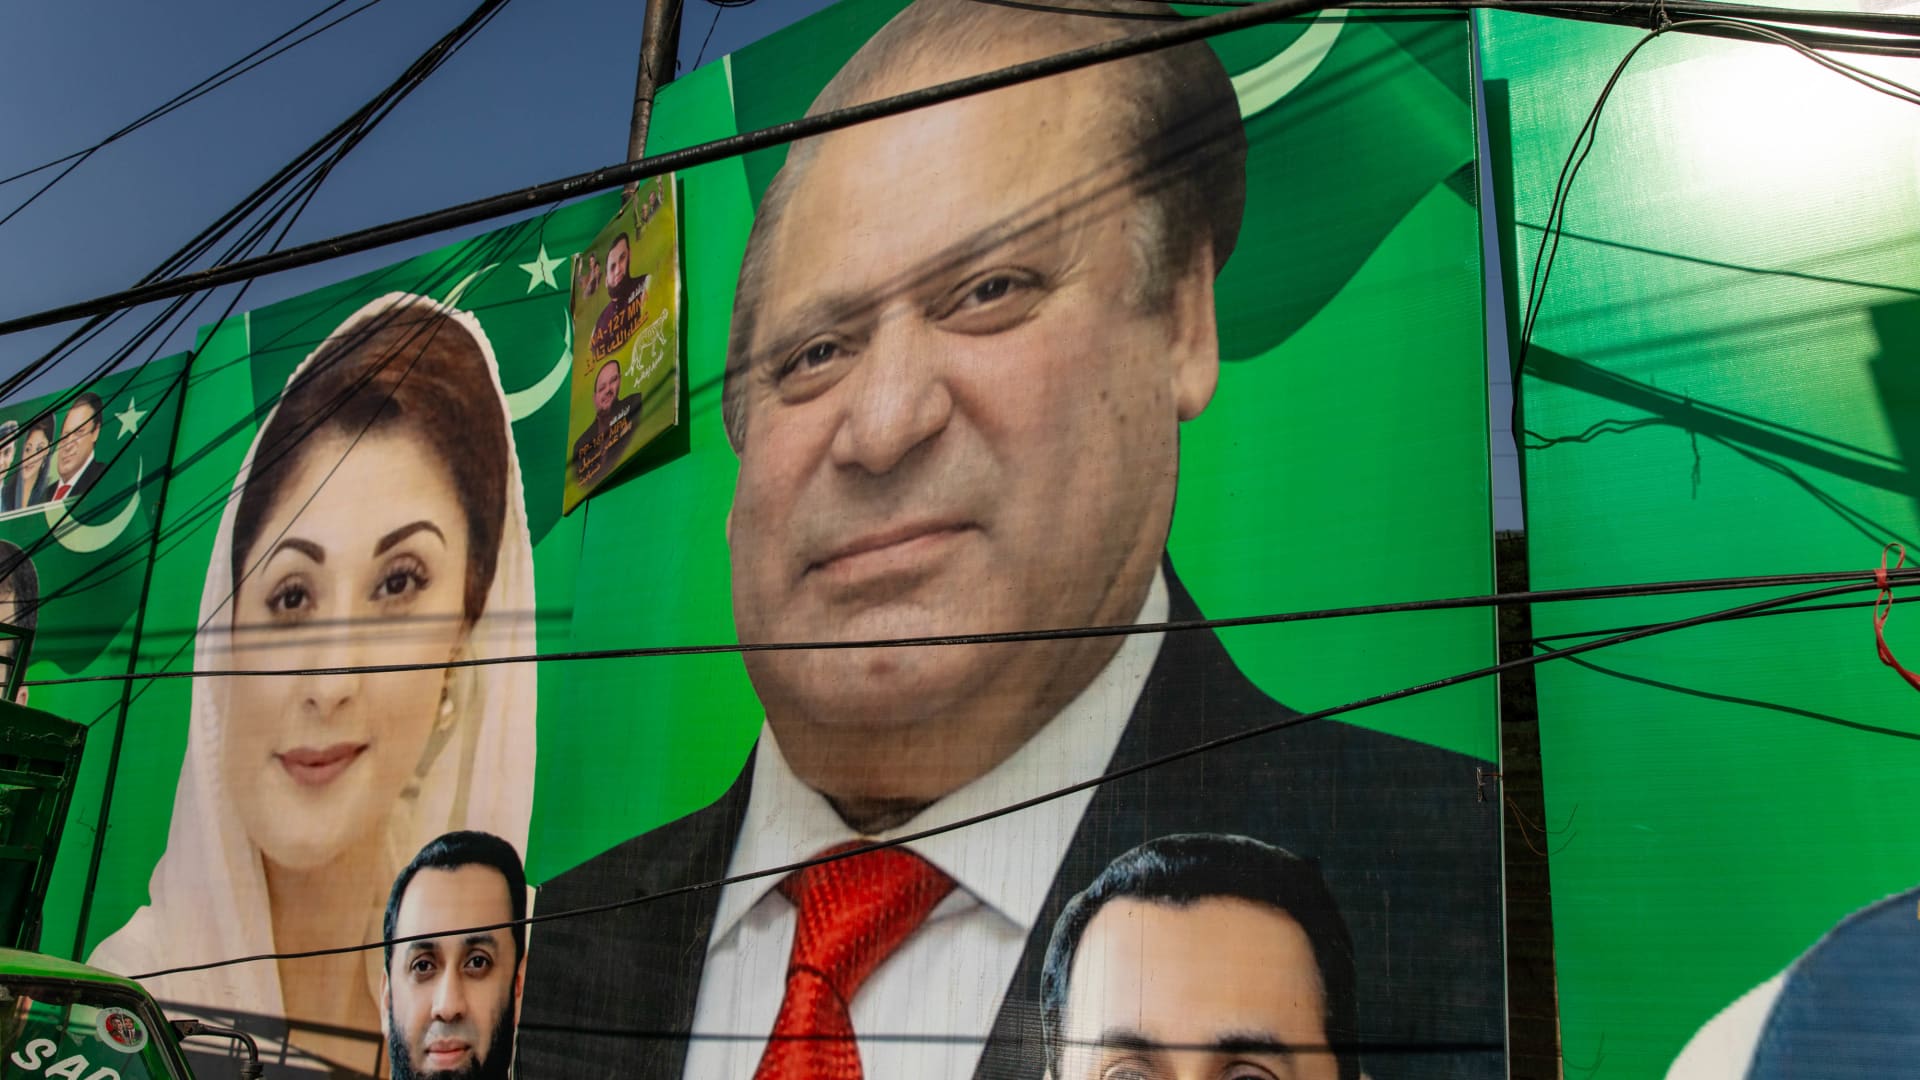 Pakistan's ex-PM Nawaz Sharif declares victory in fraught election as opponents claim vote rigging